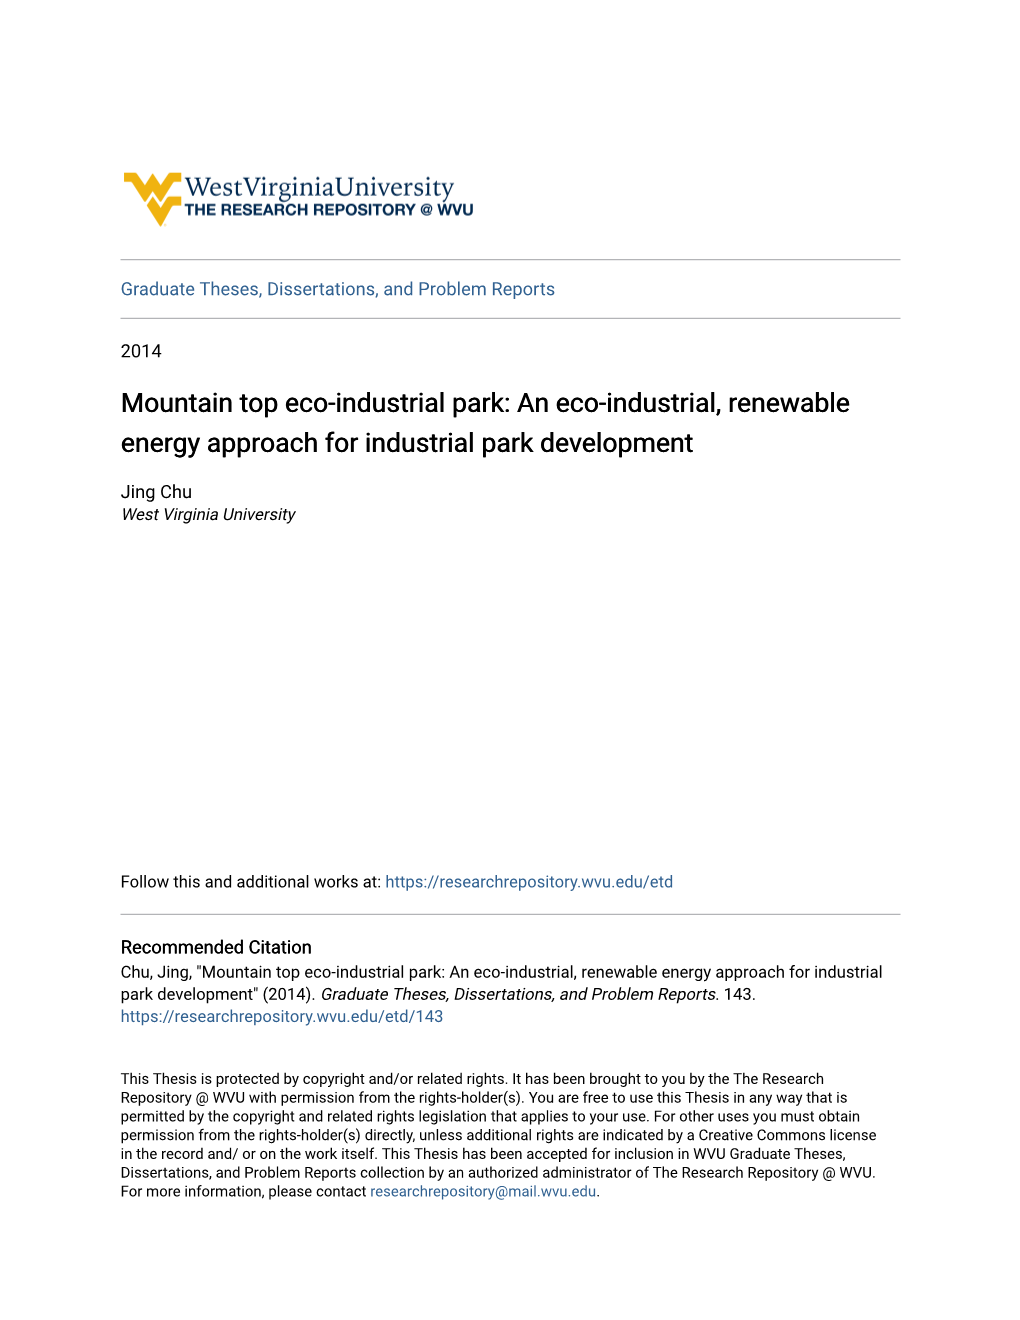 Mountain Top Eco-Industrial Park: an Eco-Industrial, Renewable Energy Approach for Industrial Park Development